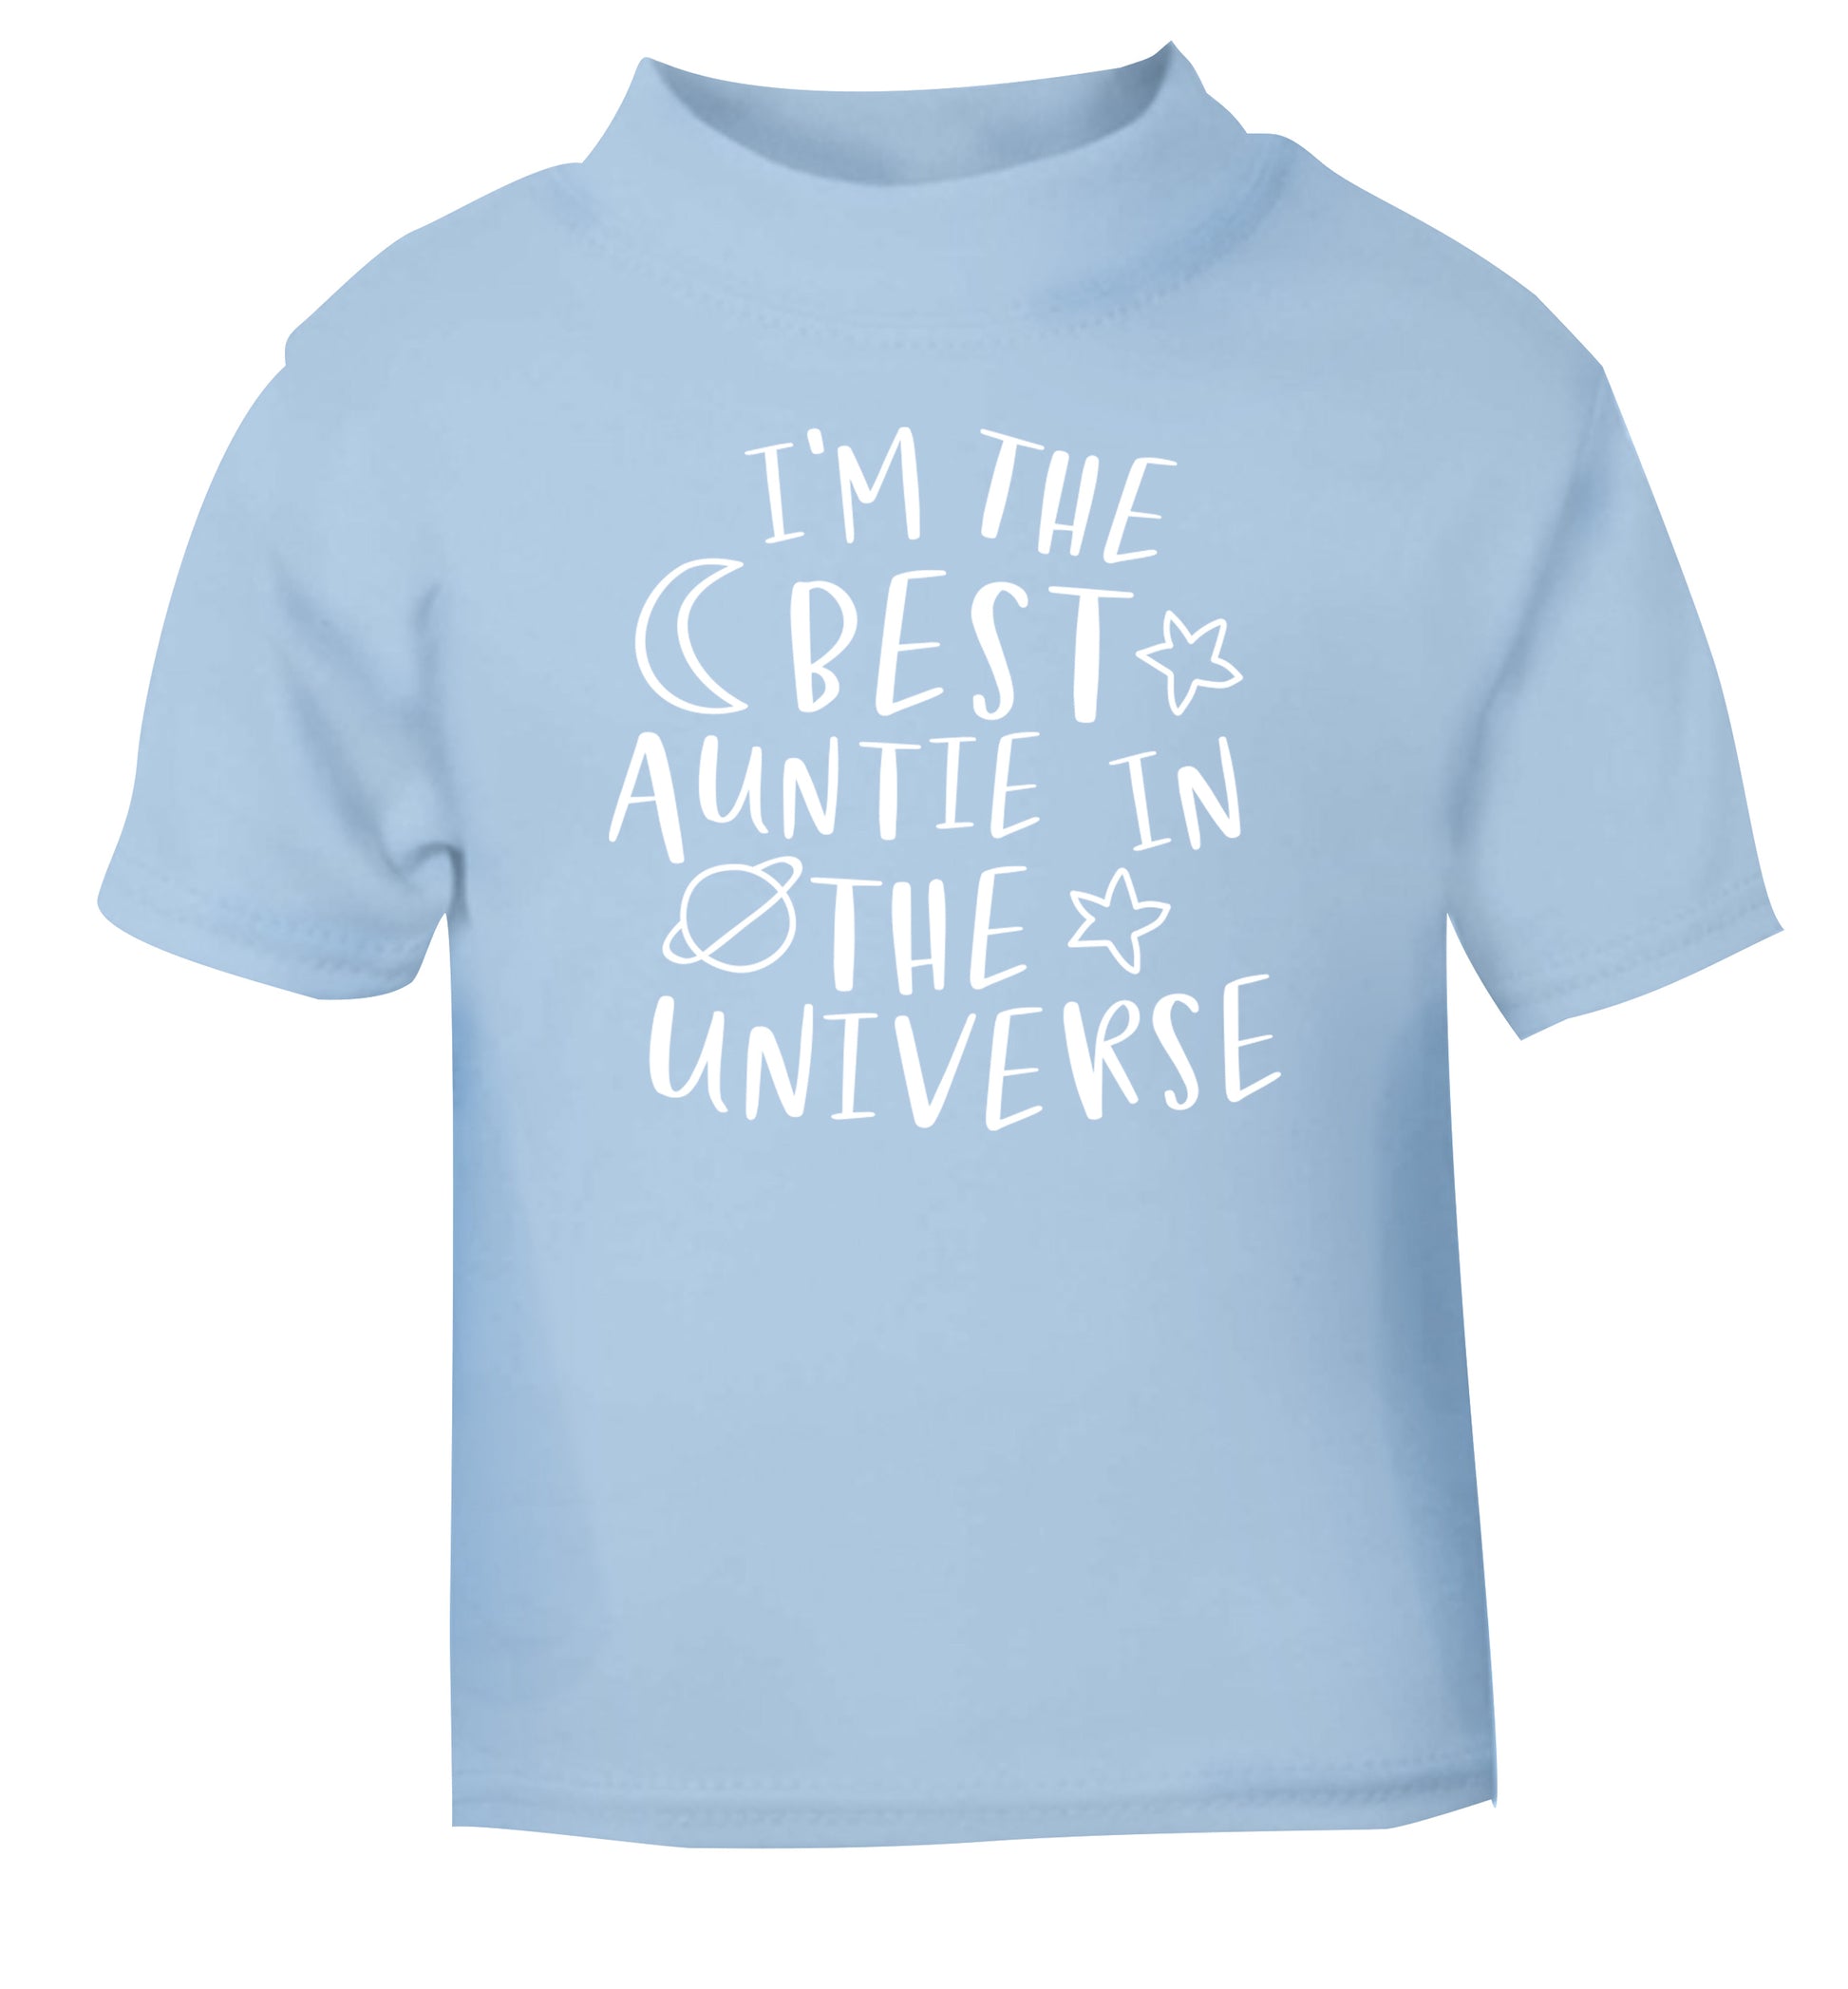 I'm the best auntie in the universe light blue Baby Toddler Tshirt 2 Years